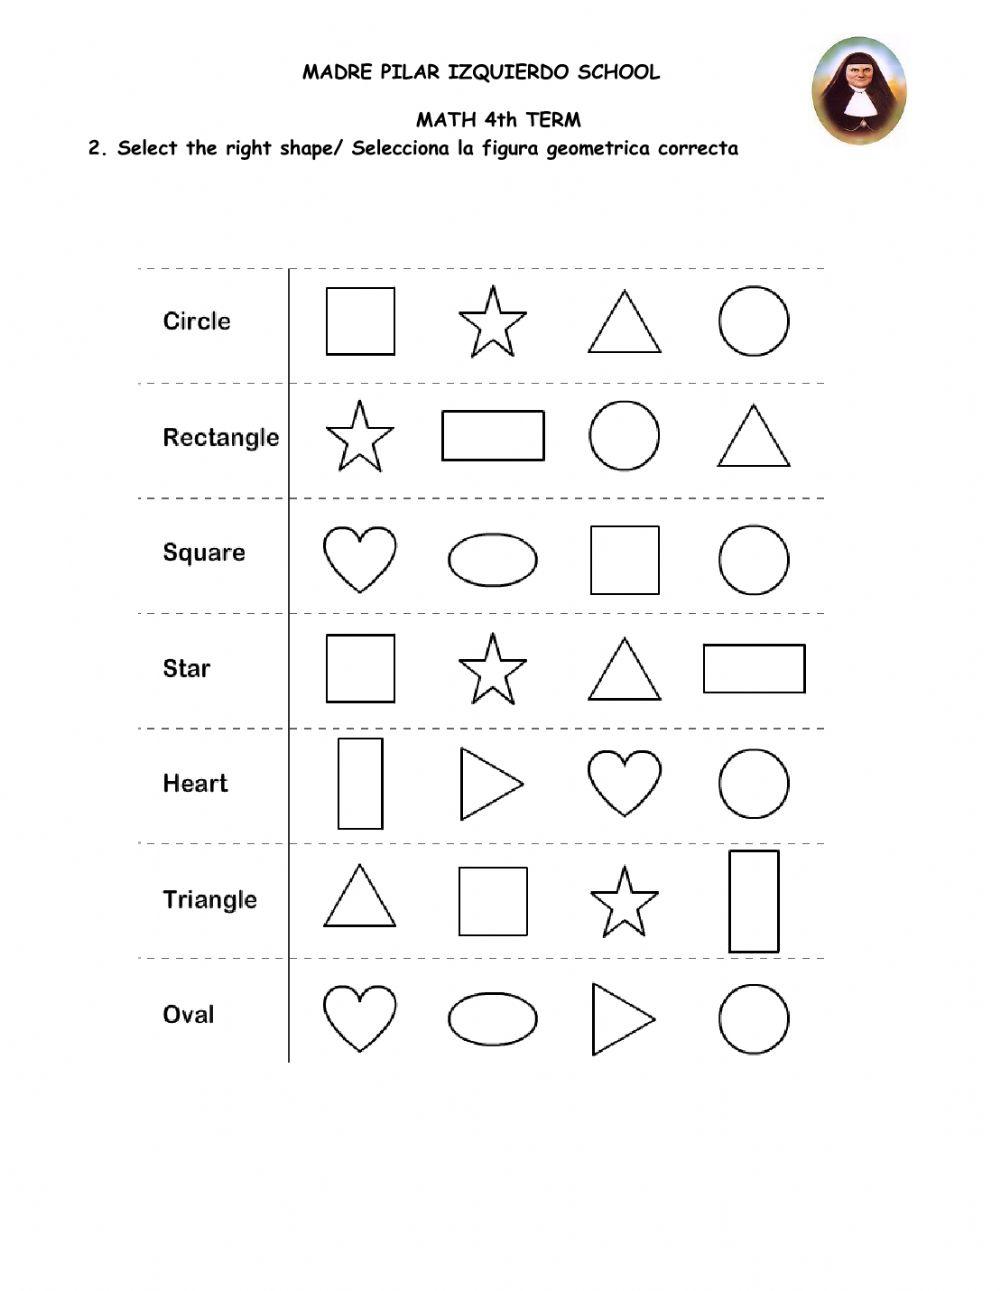 Evaluation 4th term first grade Geo